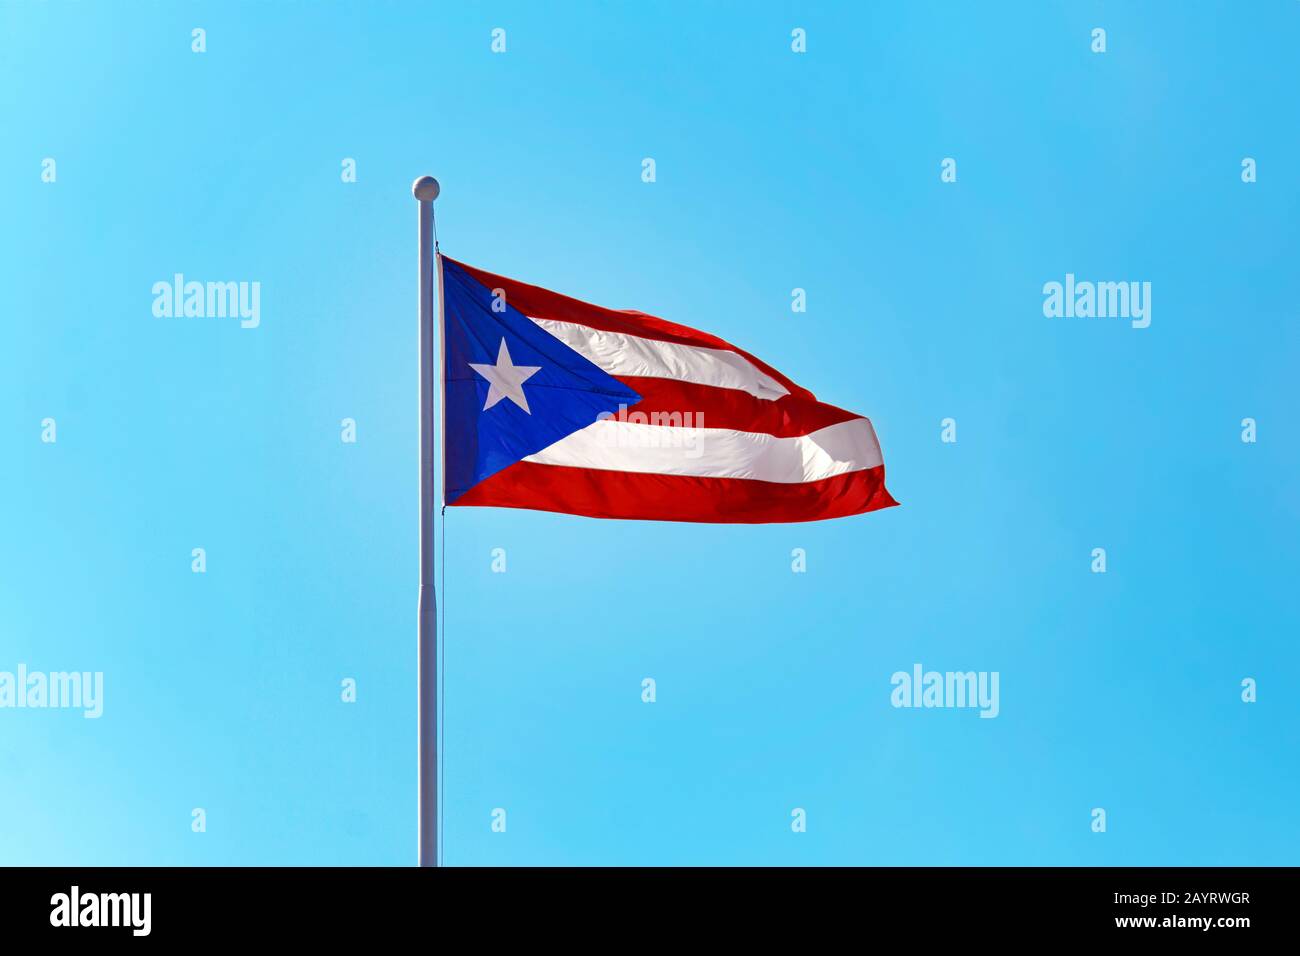 Beautiful Puerto Rican flag against a blue sky Stock Photo